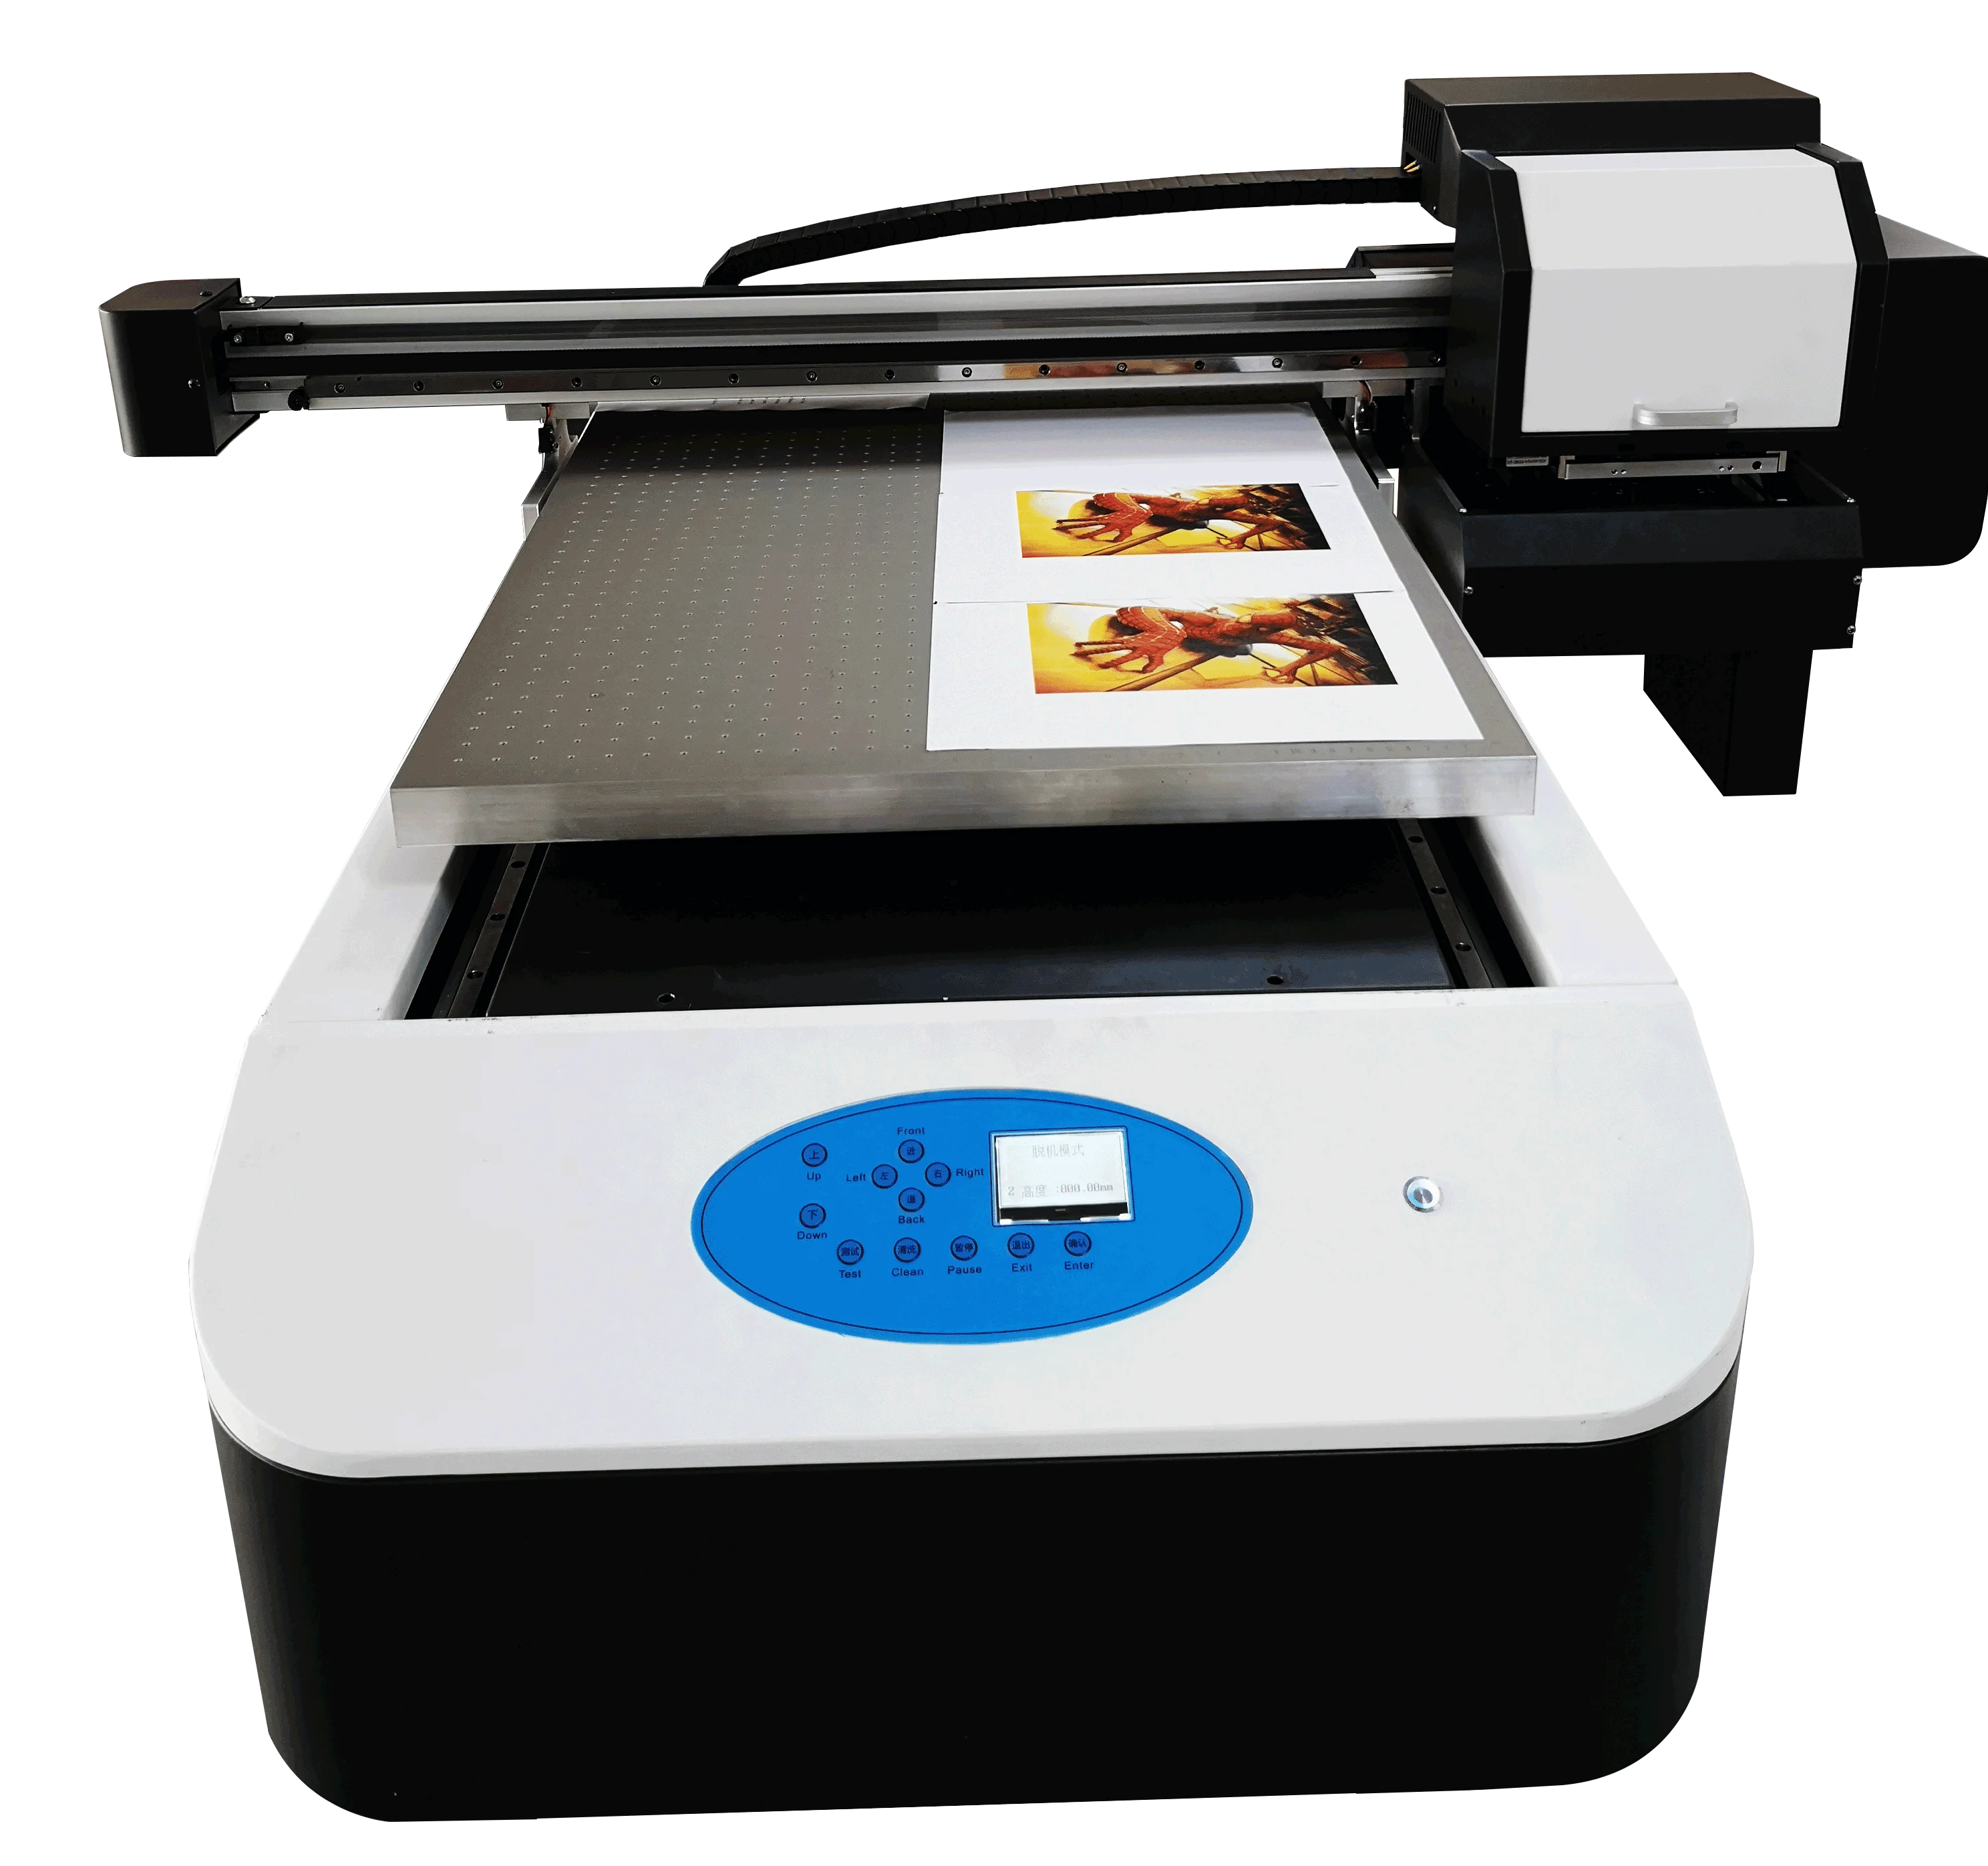 Depression Vedligeholdelse Resignation Wholesale A2 Uv Flatbed Printer Price/small Uv Flatbed Printing Machine  Price Printing Shops Label Printer 1 YEAR Multi Color Automatic From  m.alibaba.com